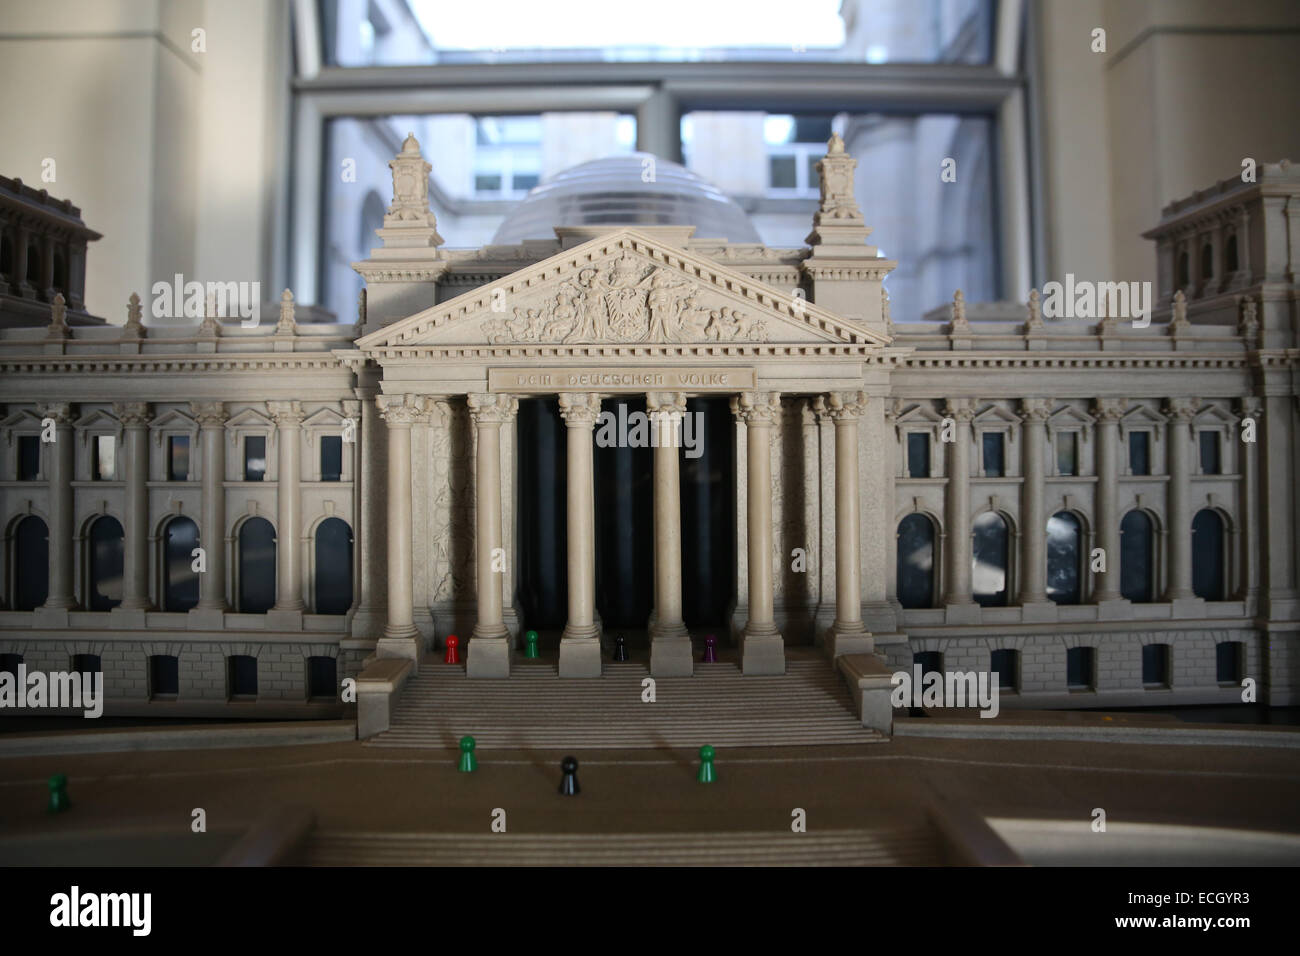 reichstag parliament building scale model Stock Photo